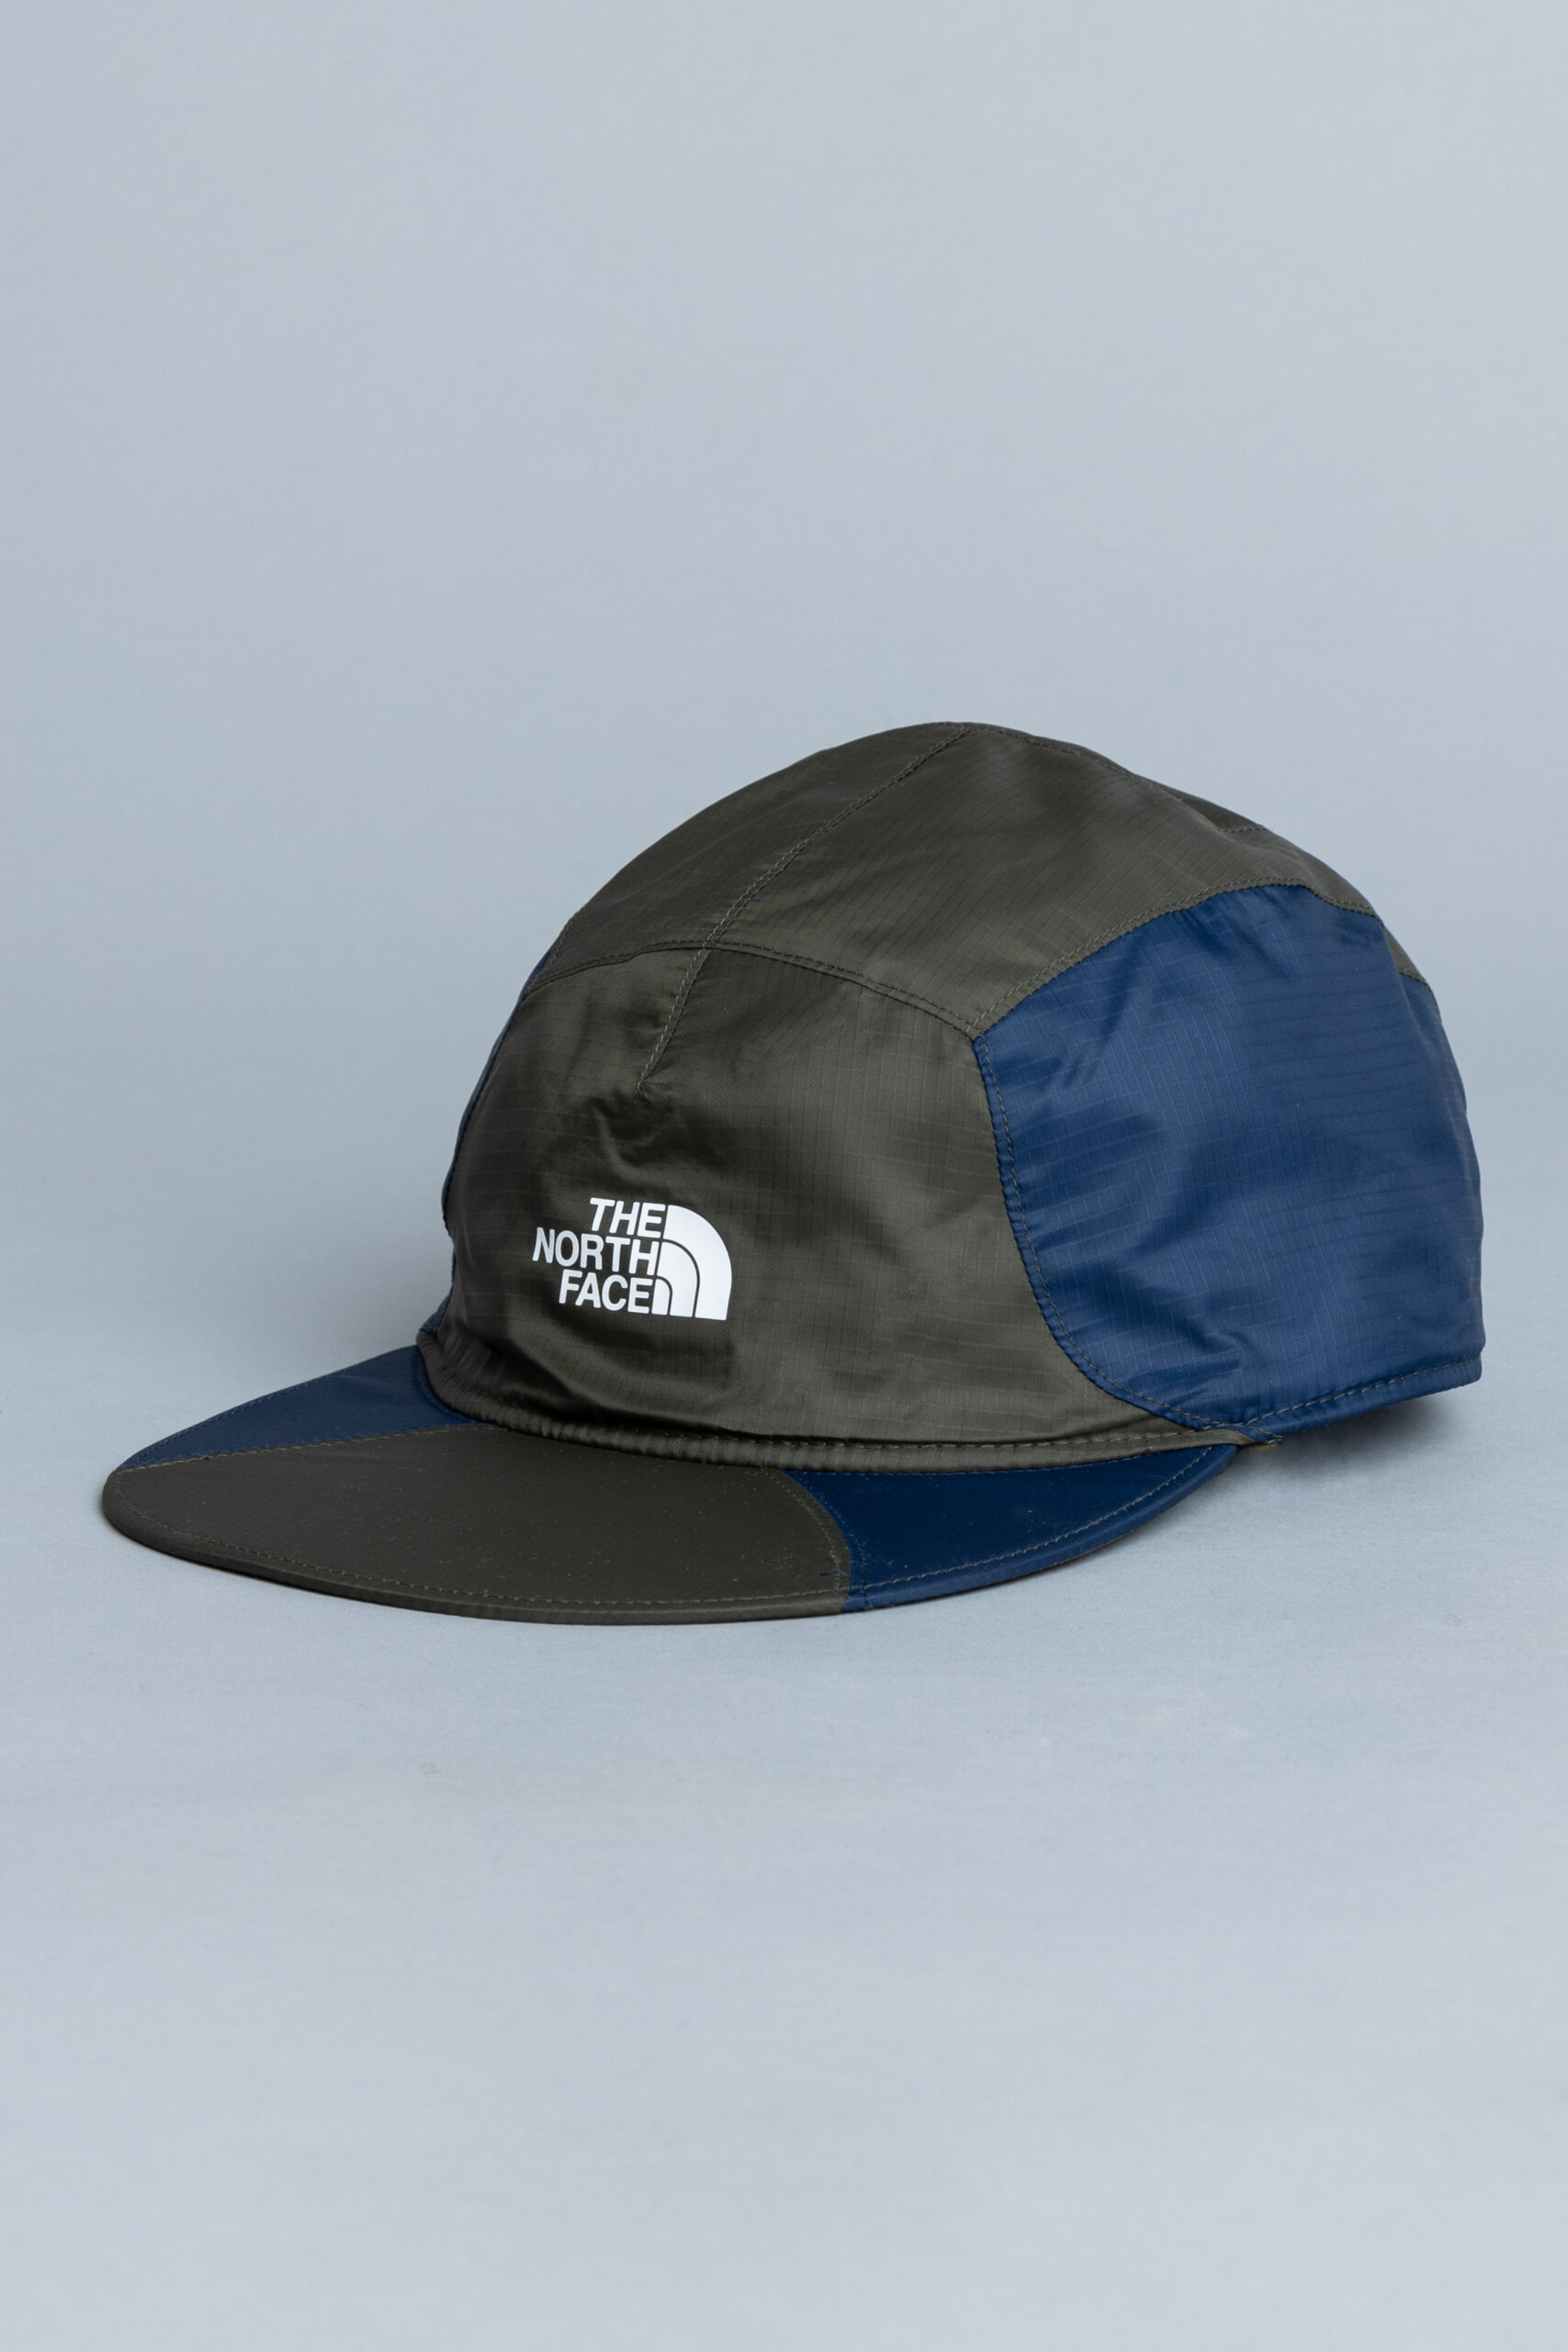 The North Face 92 Retro Cap New Taupe Green • Centreville Store